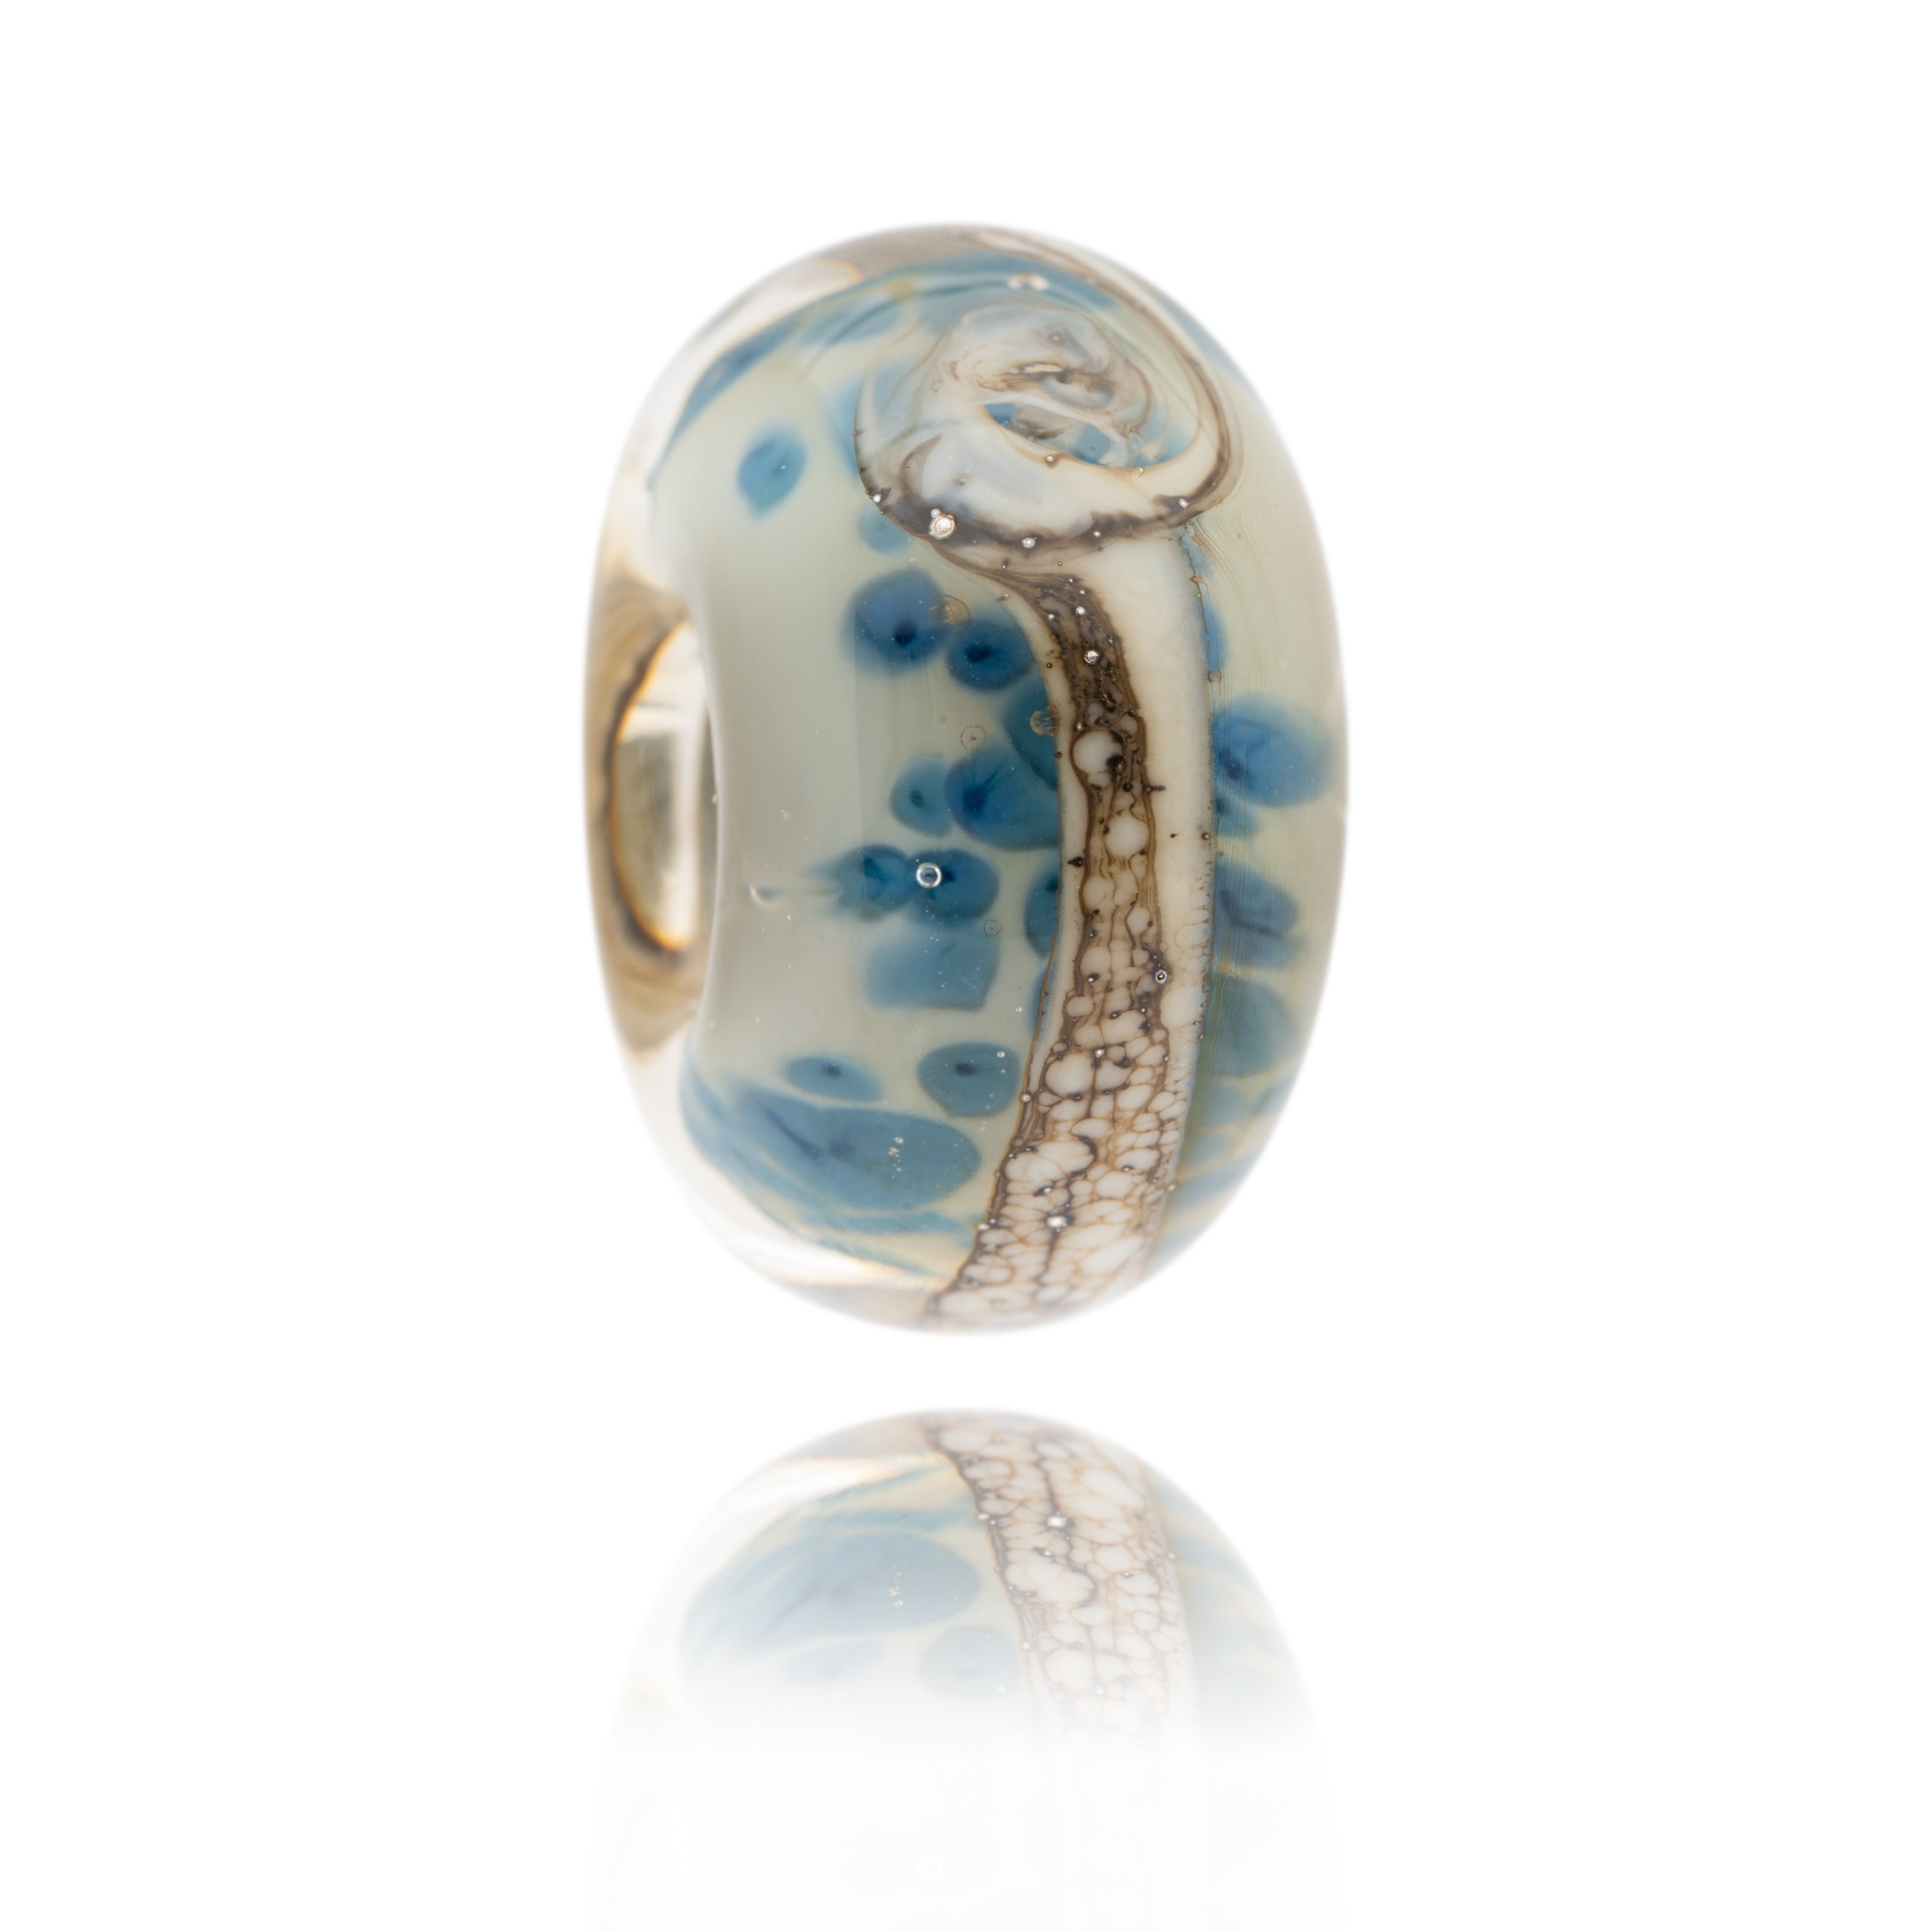 Cream glass bead with dark blue patterns within the glass. This bead represents Bamburgh Beach in Northumberland.